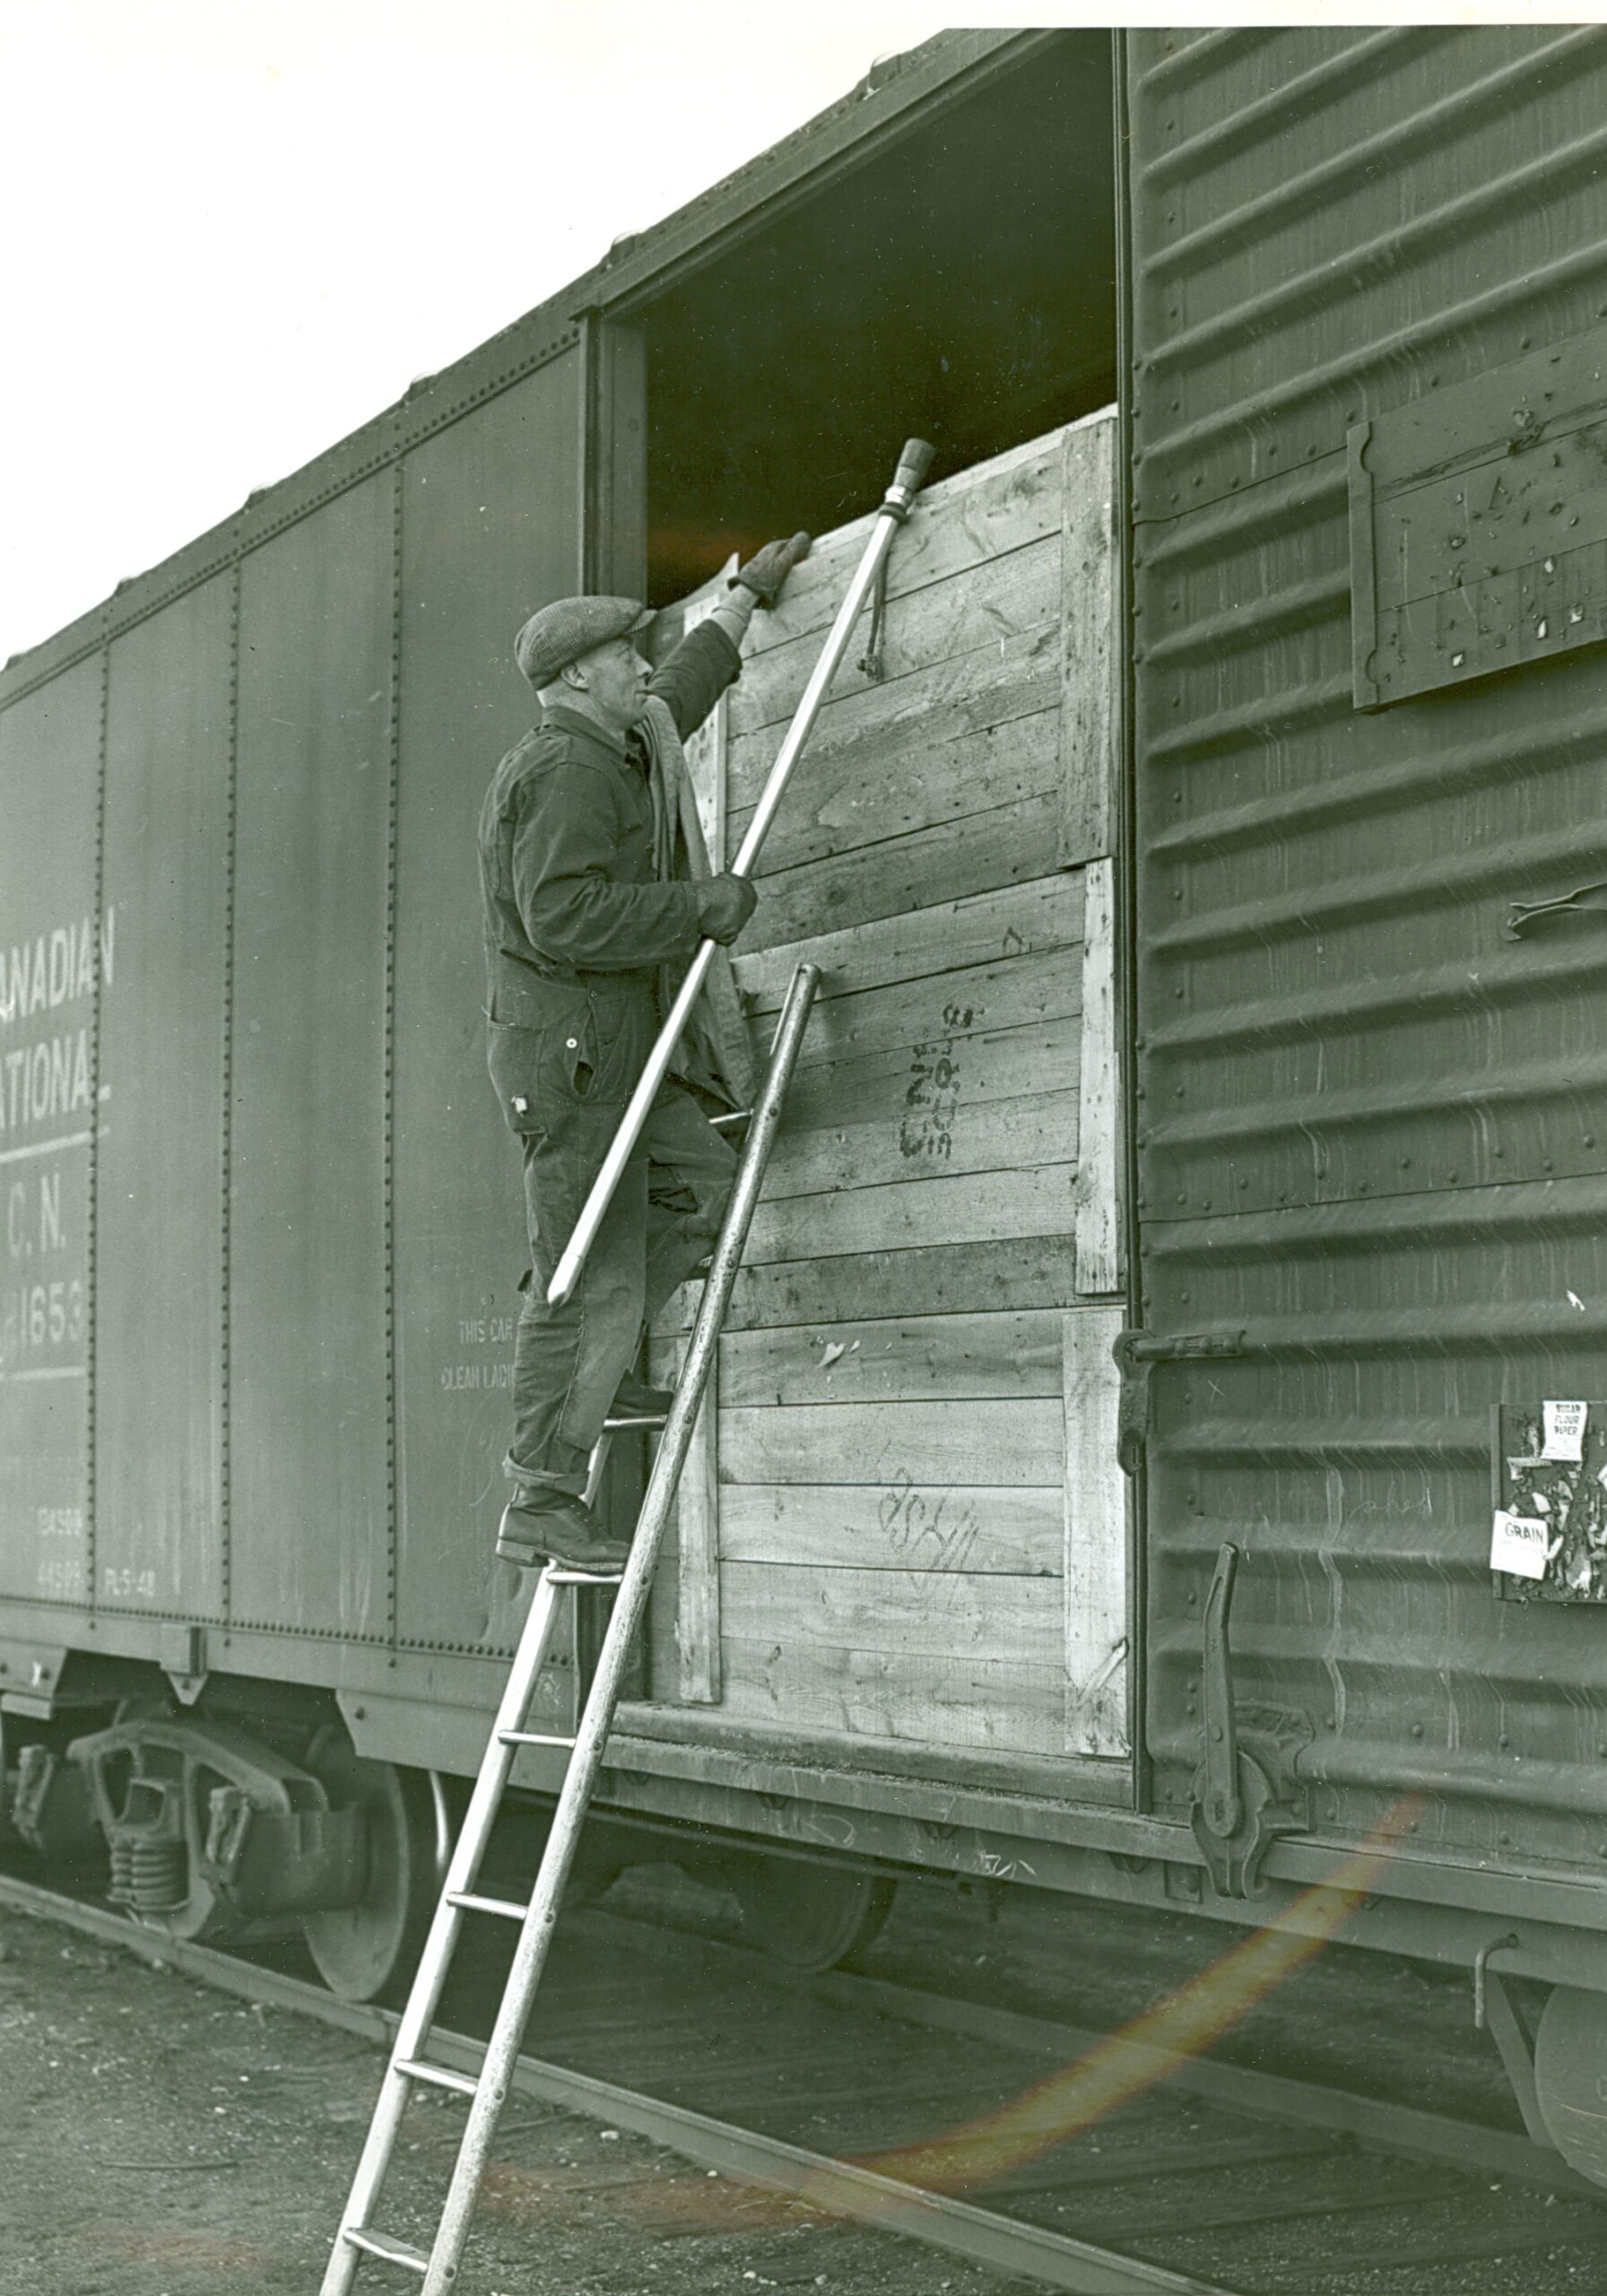 8 x 10 b &amp; w, showing sampler climbing ladder to enter car. He is holding a piece of cloth that appeared on top of the grain in a previous slide. What is the cloth for?